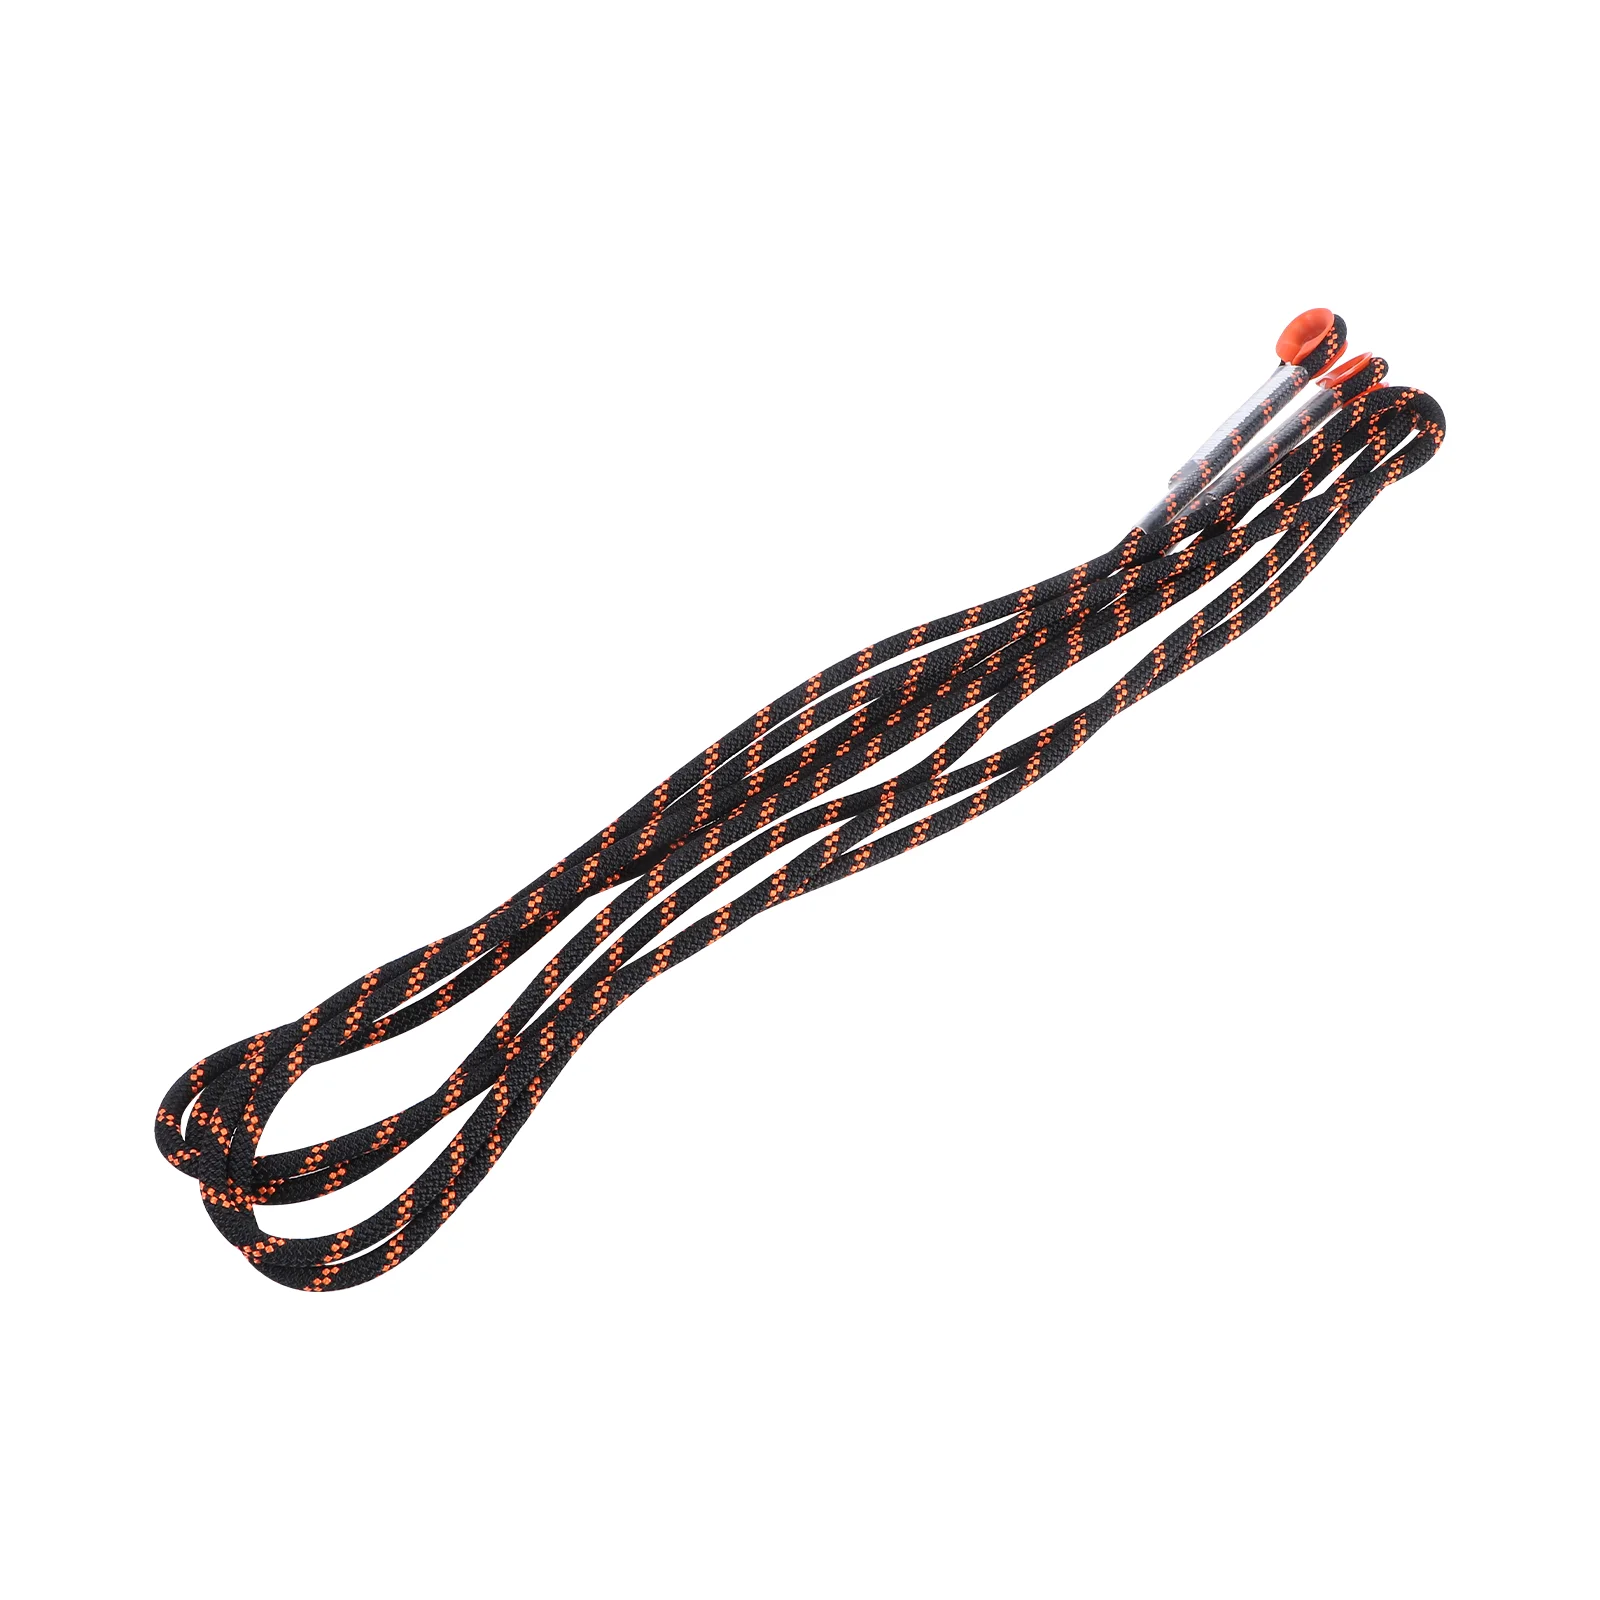 Details about   1PC Thickness Tree Climbing Safety Sling Cord Rope Equipment for Outdoor Sport 